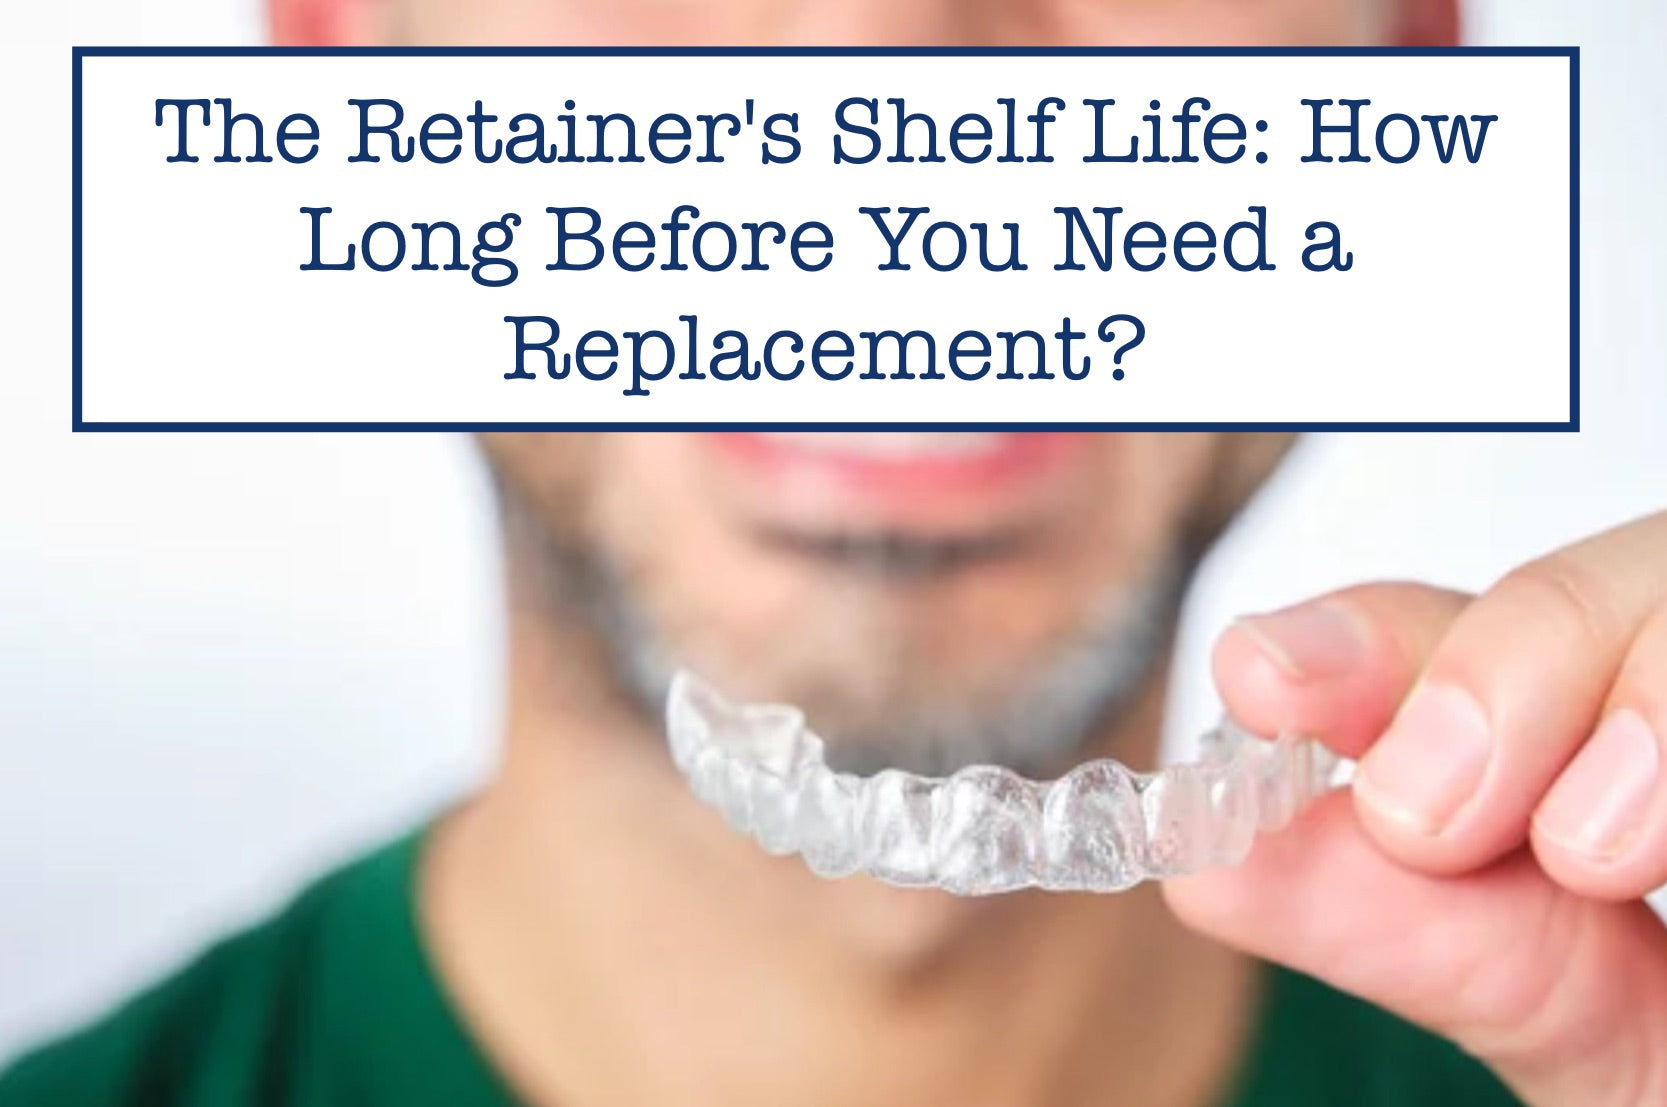 The Retainer's Shelf Life: How Long Before You Need a Replacement?